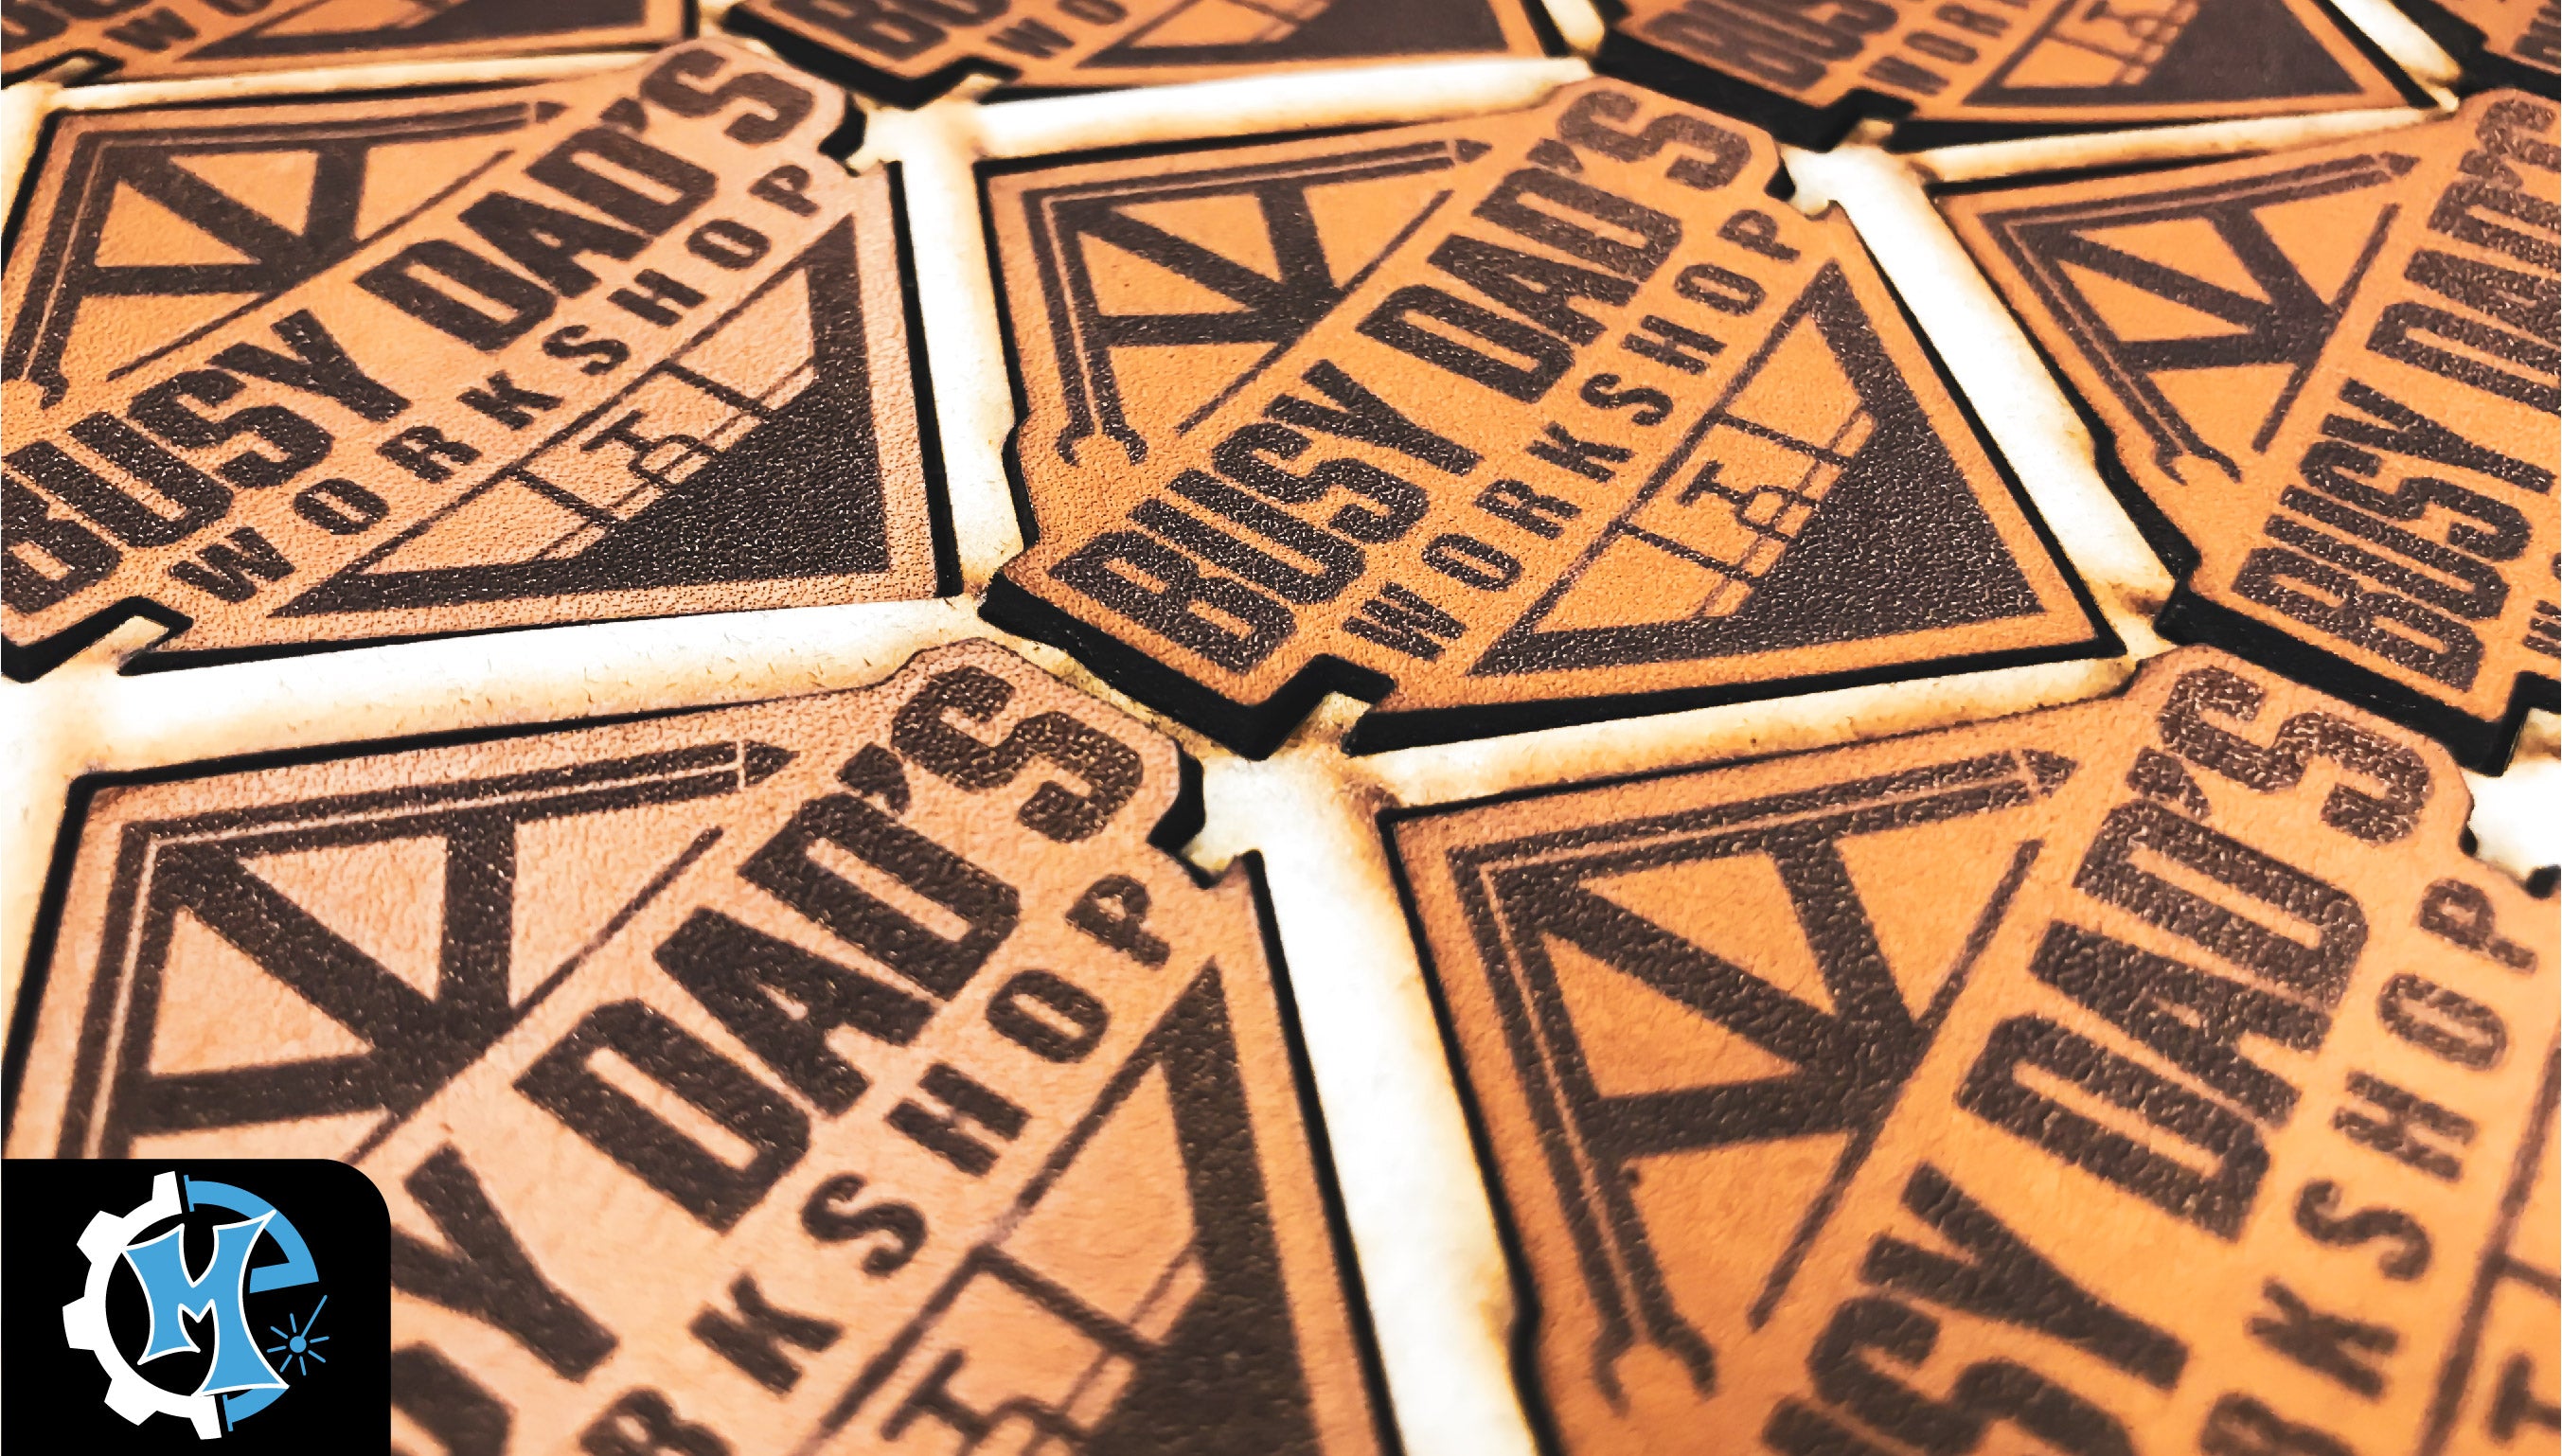 Making Leather Patches For Hats and Apparel With Your Co2 Laser  Engraver-How It's Made! 